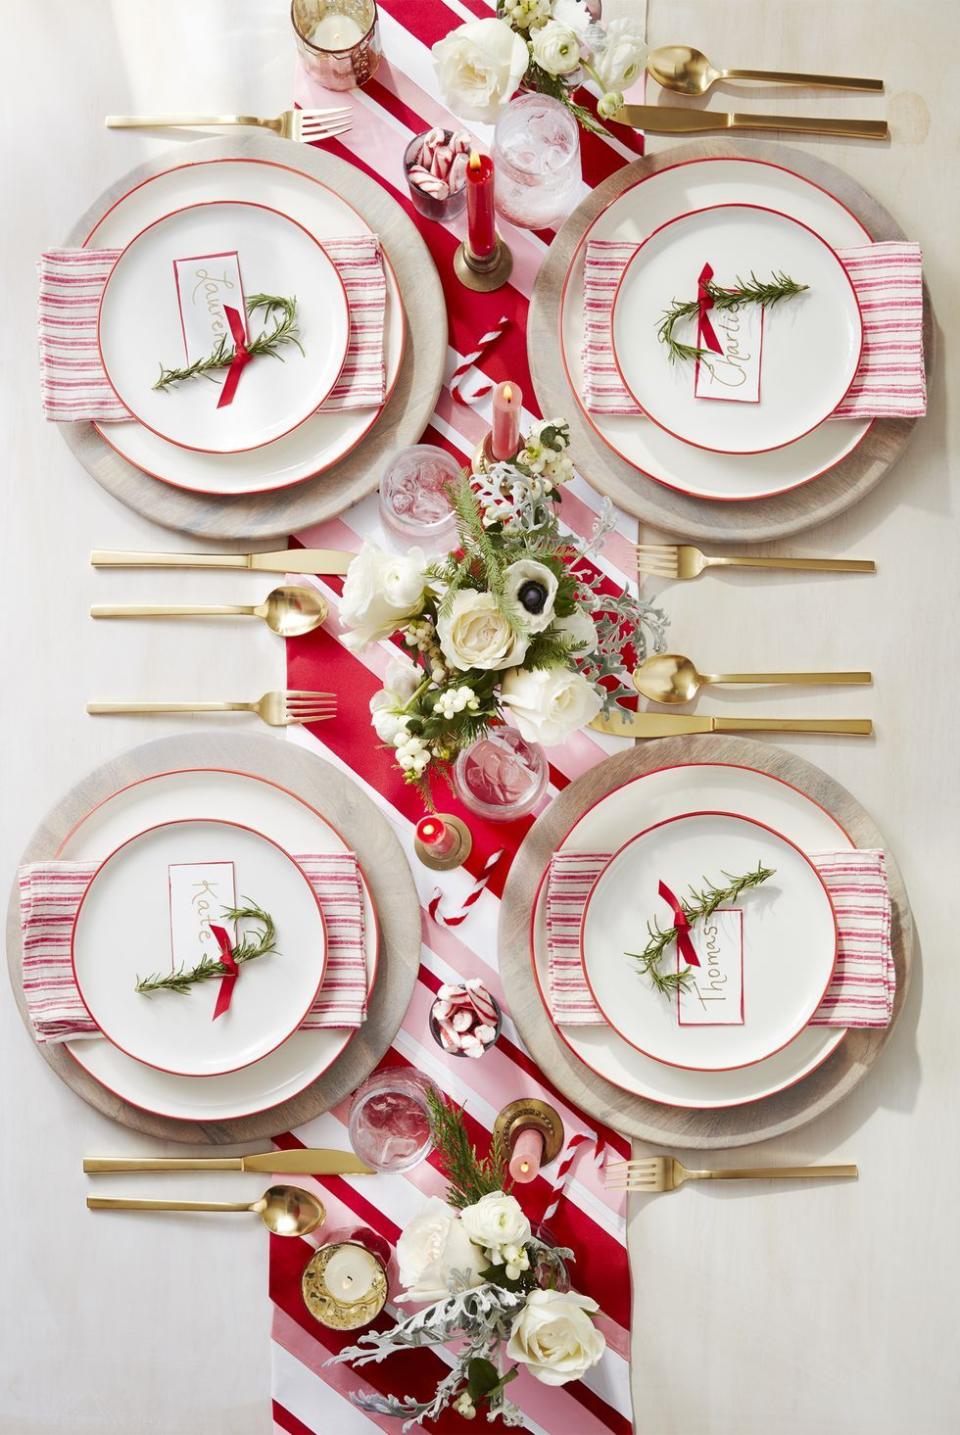 The Best DIY Christmas Table Settings To Put Your Creativity to the Test